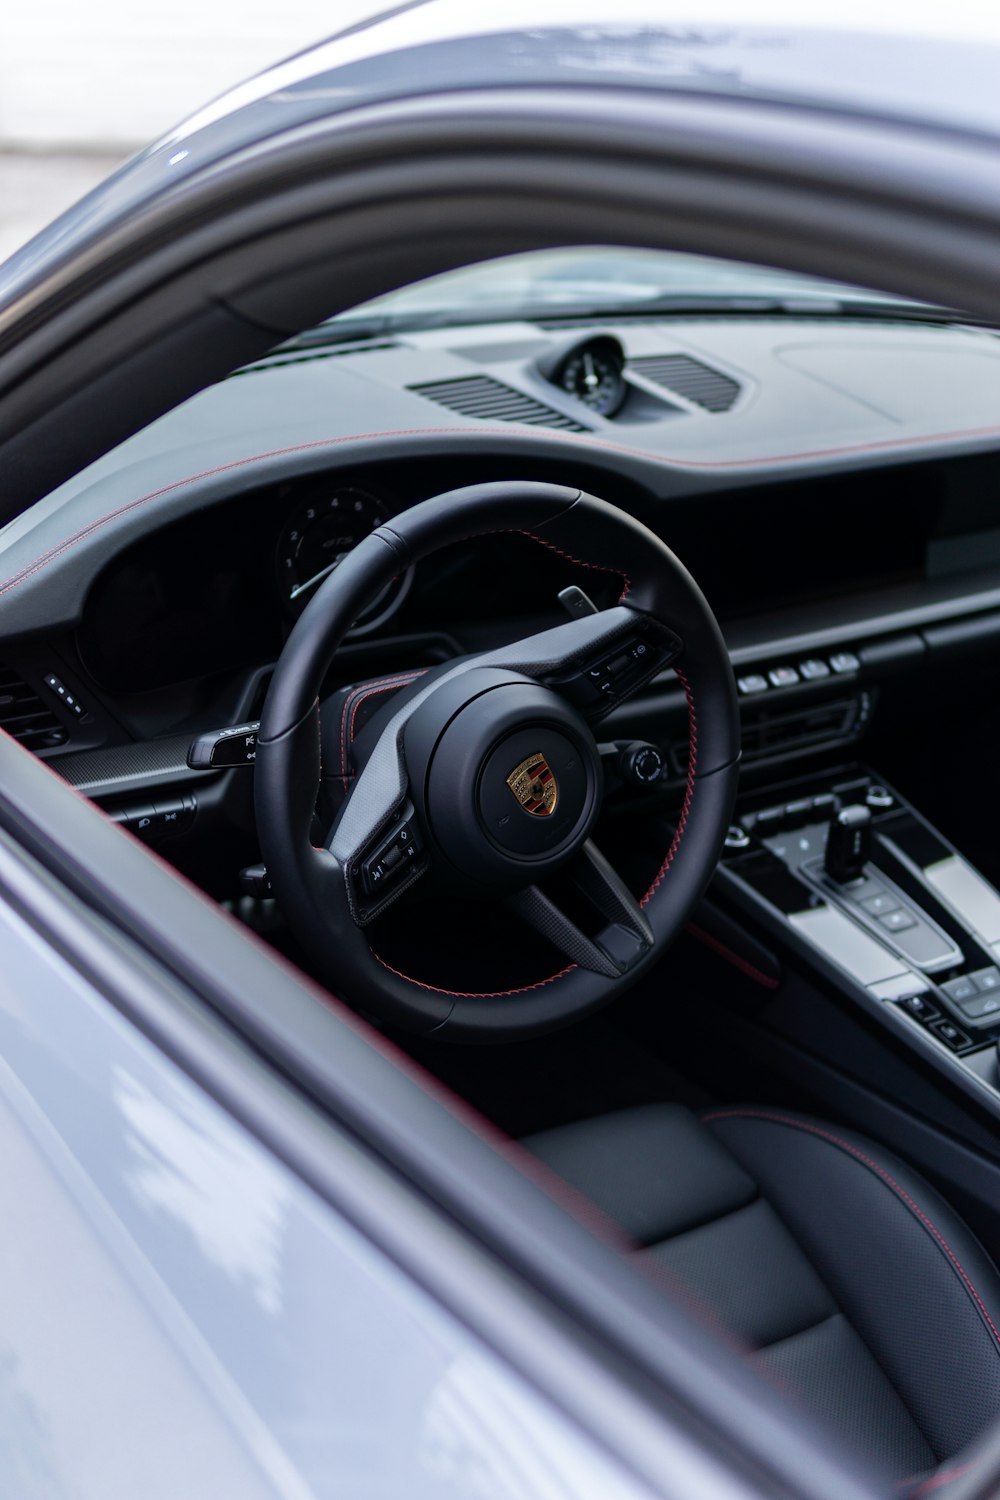 a close up of a car's steering wheel and dashboard